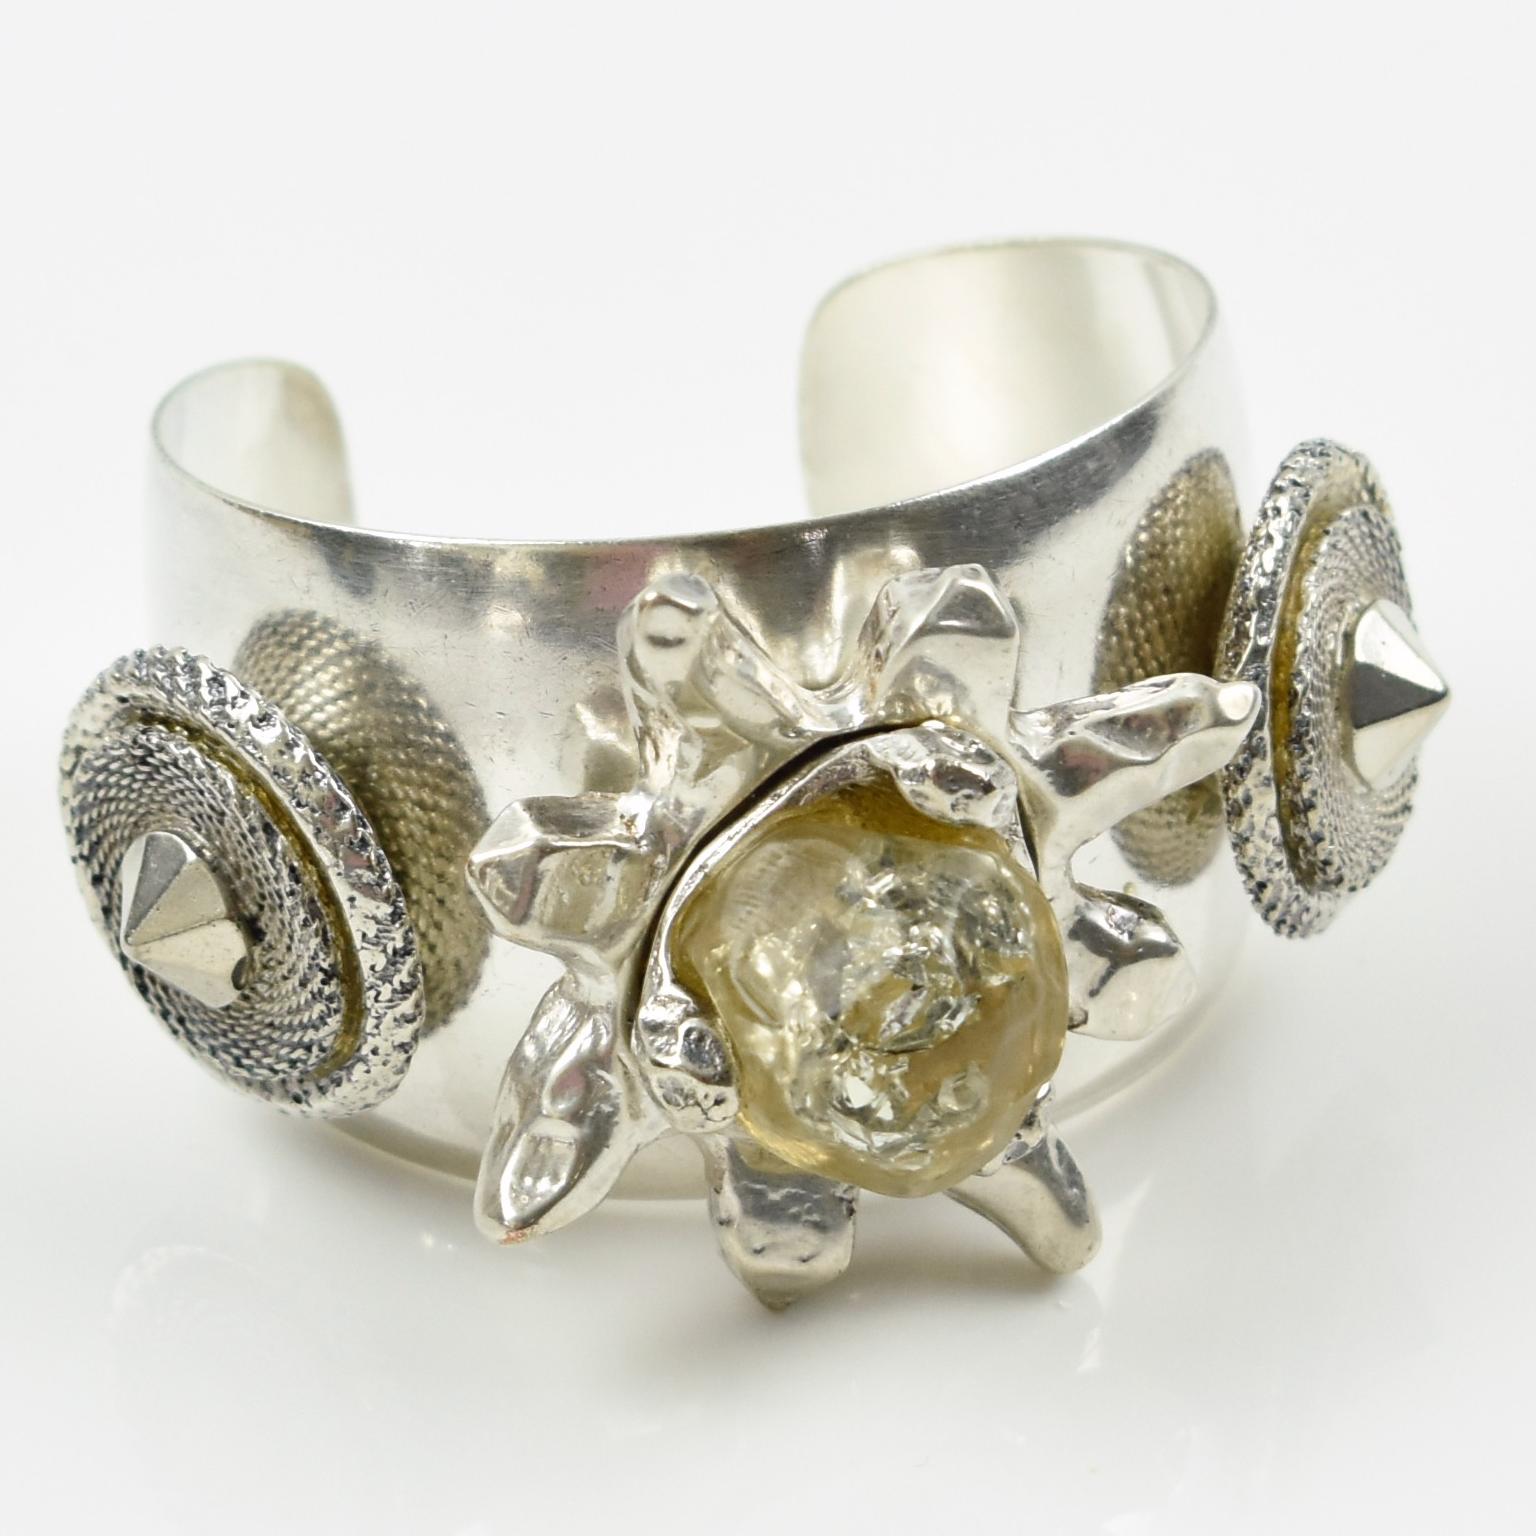 This beautiful modernist cuff bracelet designed by Kalinger, Paris, features a silver plate metal large cuff bangle shape topped with three charm elements built with silver plated metal carved wheels and a transparent resin flower. The signature